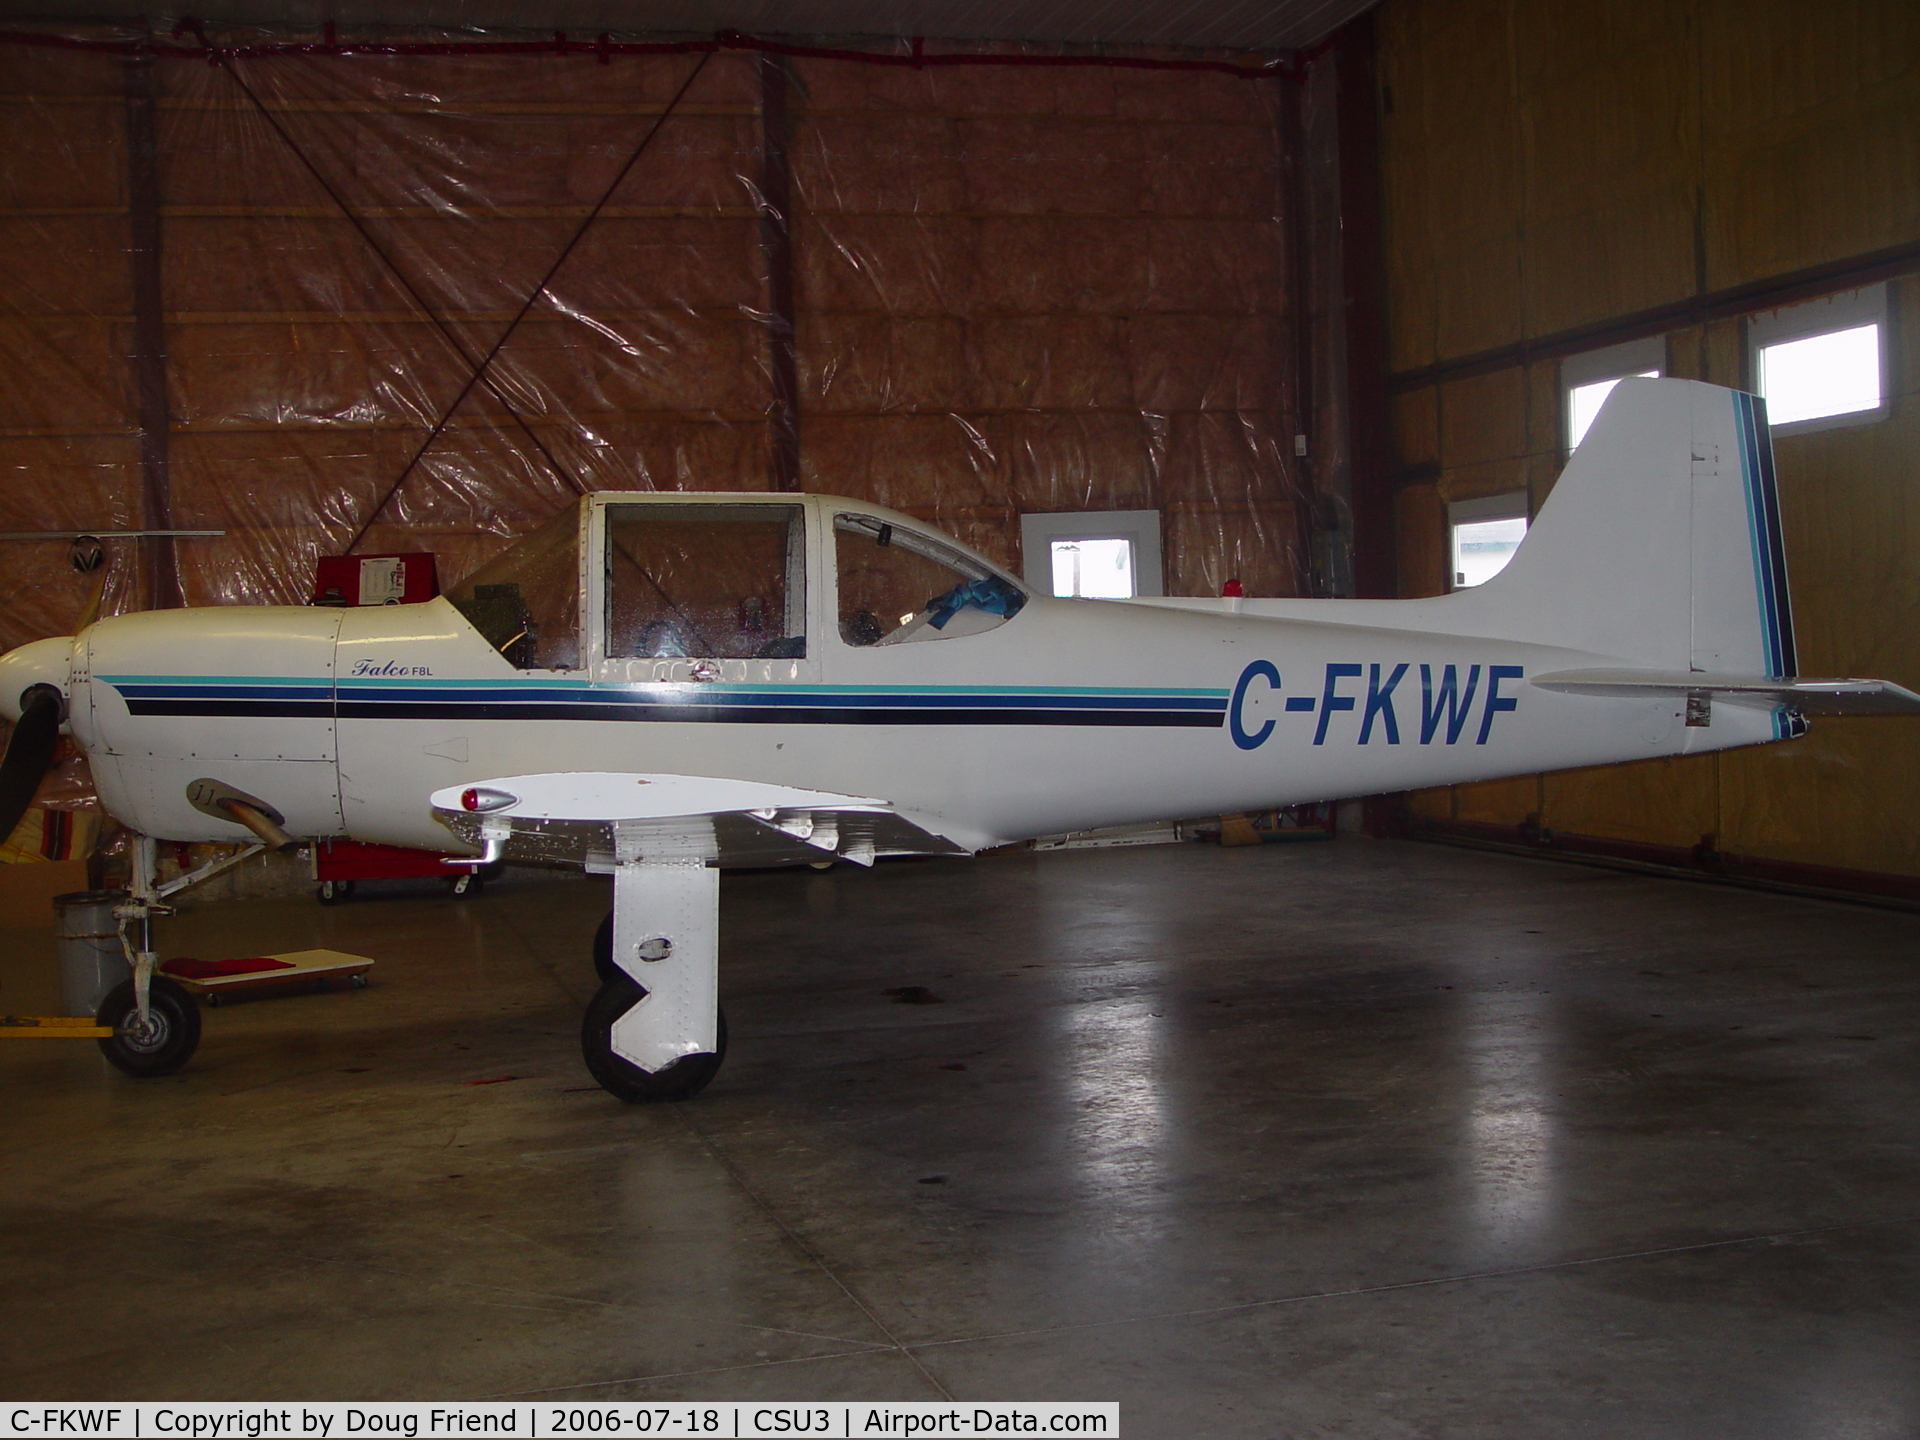 C-FKWF, 1994 Sequoia F.8L C/N 798, Used to own this airplane.  She was a pleasure to fly!